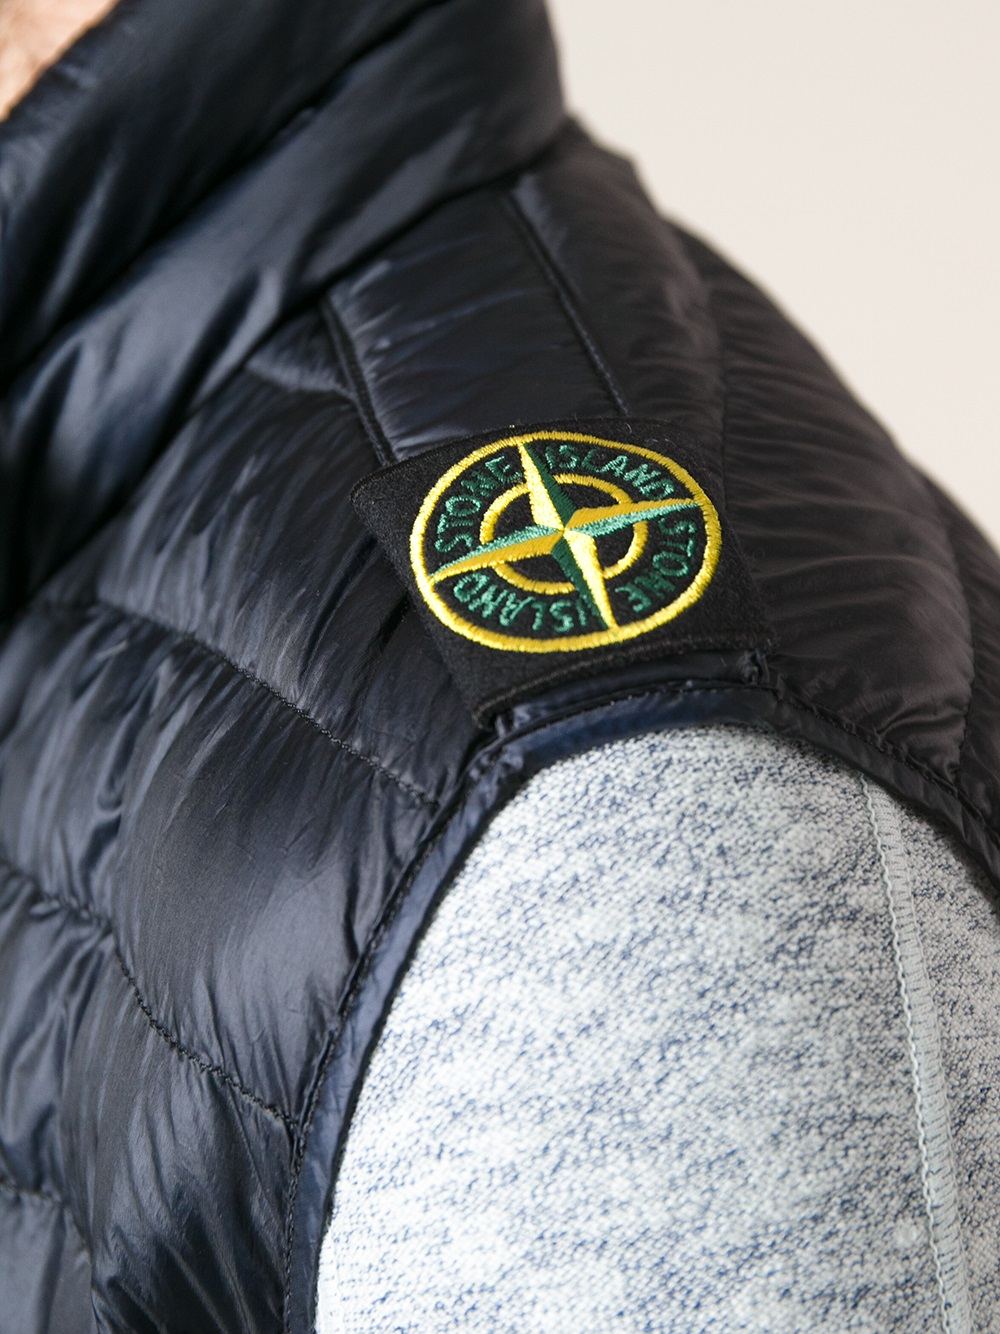 Stone Island Classic Padded Gilet in Black (Blue) for Men - Lyst